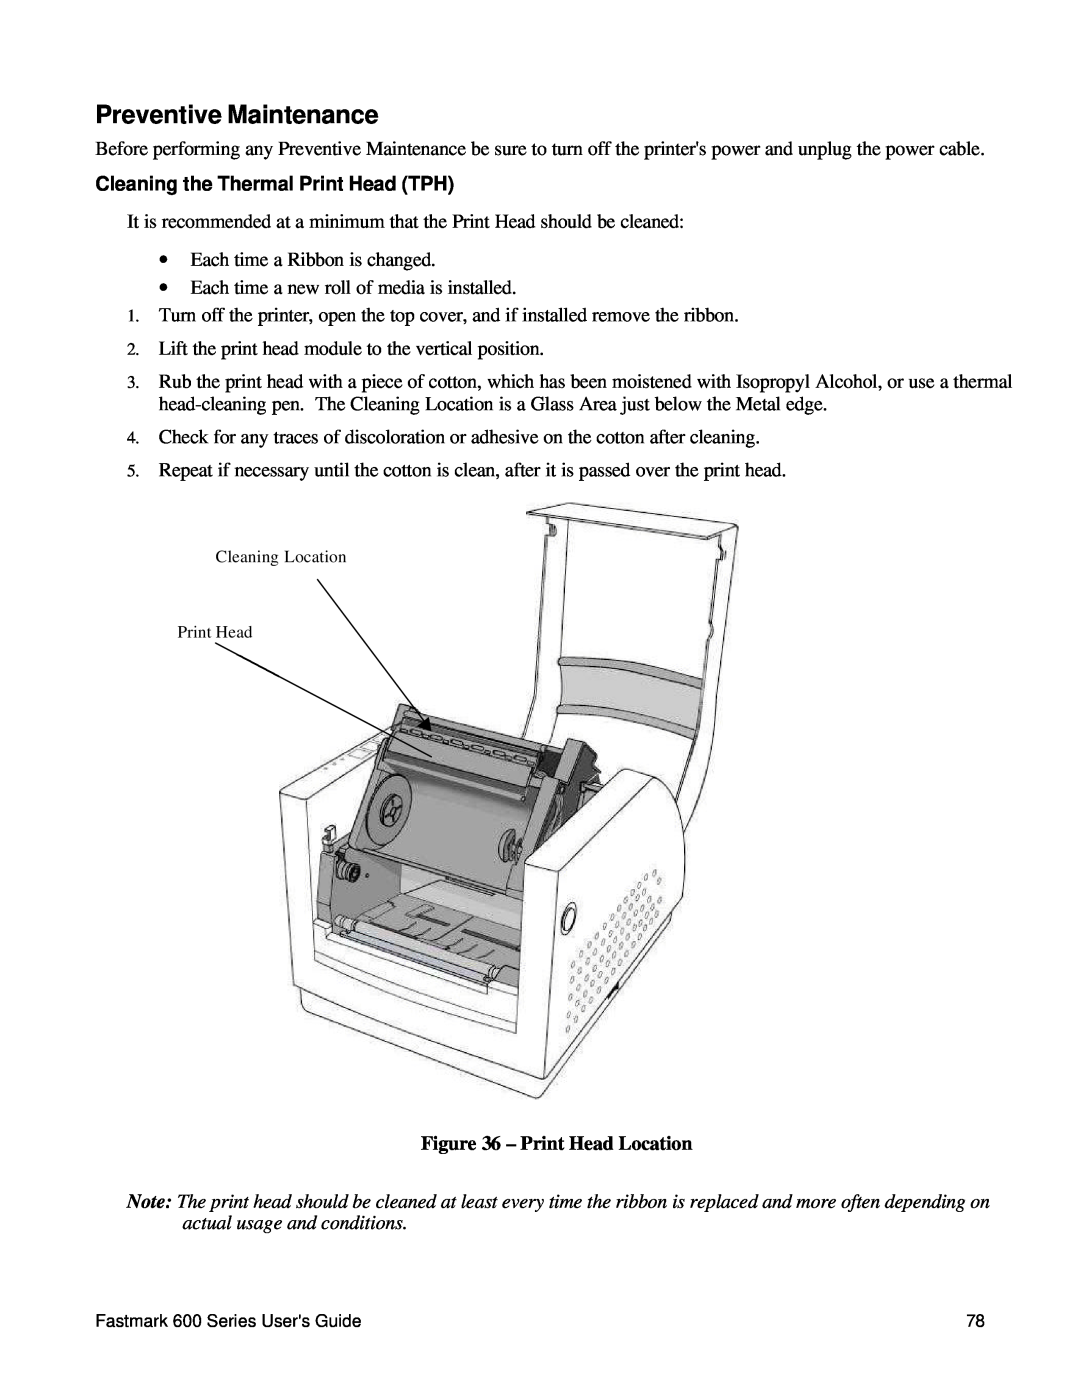 AMT Datasouth 600 manual Preventive Maintenance, Cleaning the Thermal Print Head TPH, Print Head Location 